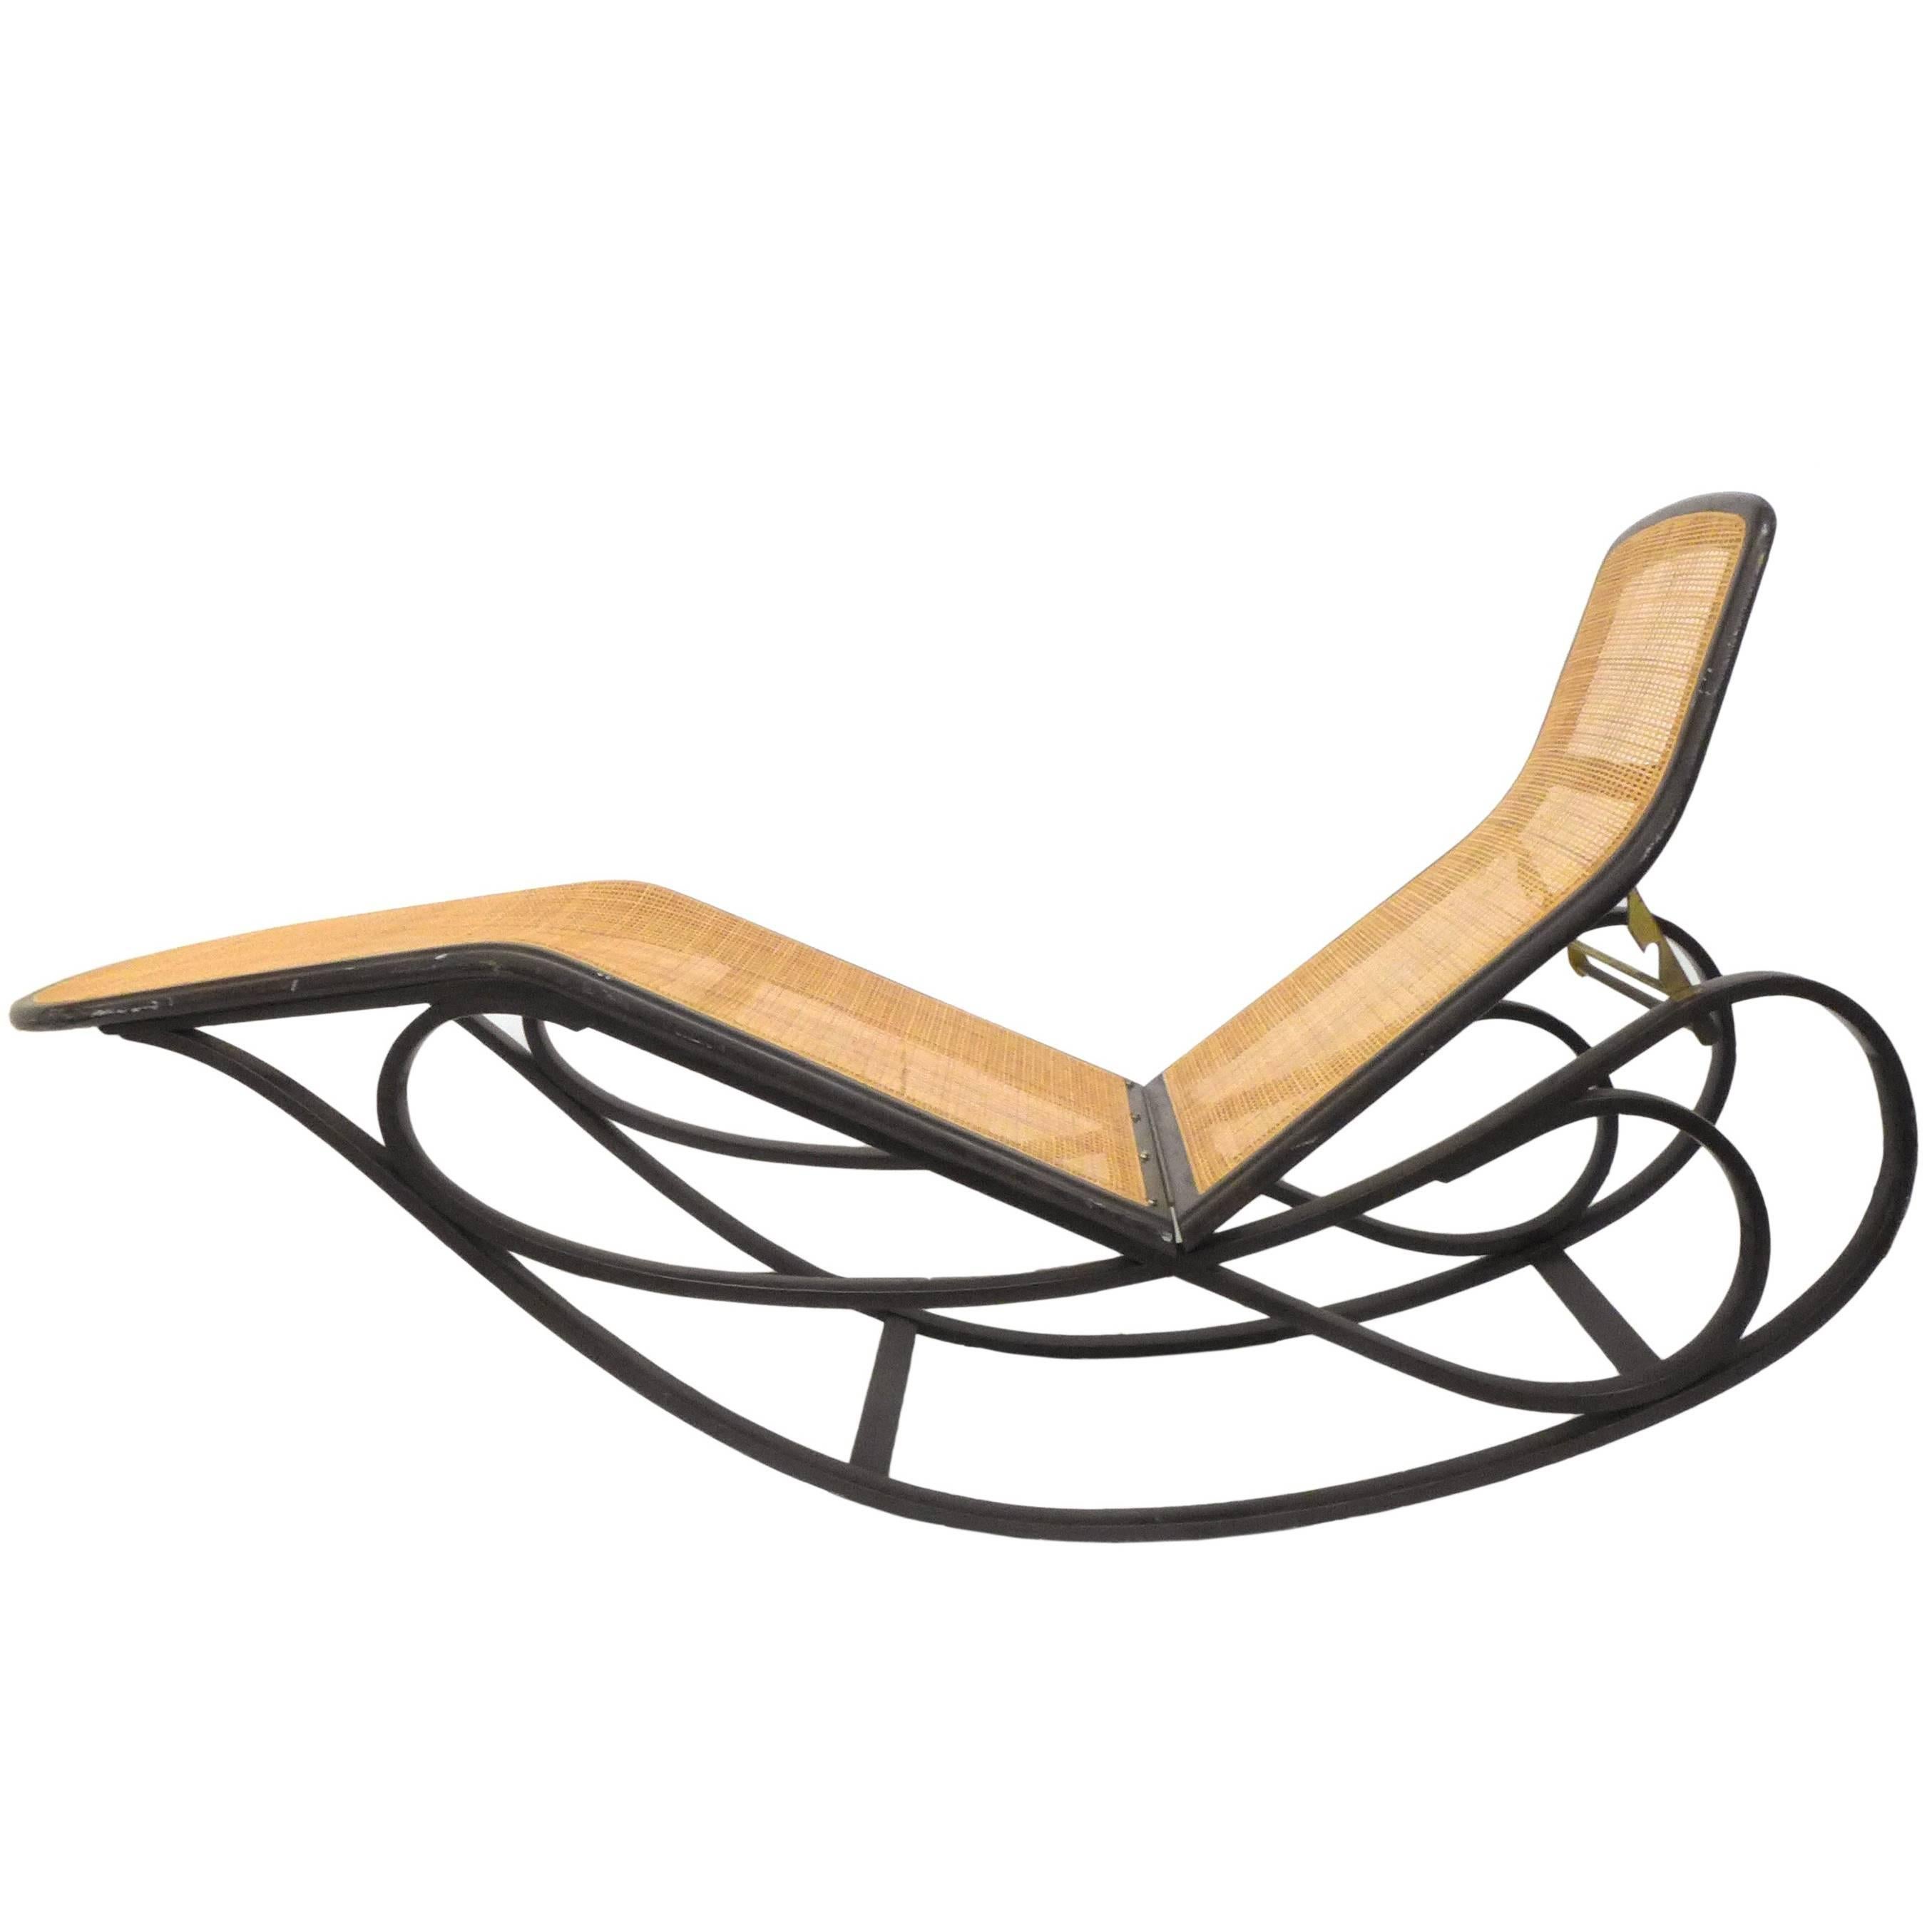 Rocking Chaise Lounge by Edward Wormley for Dunbar